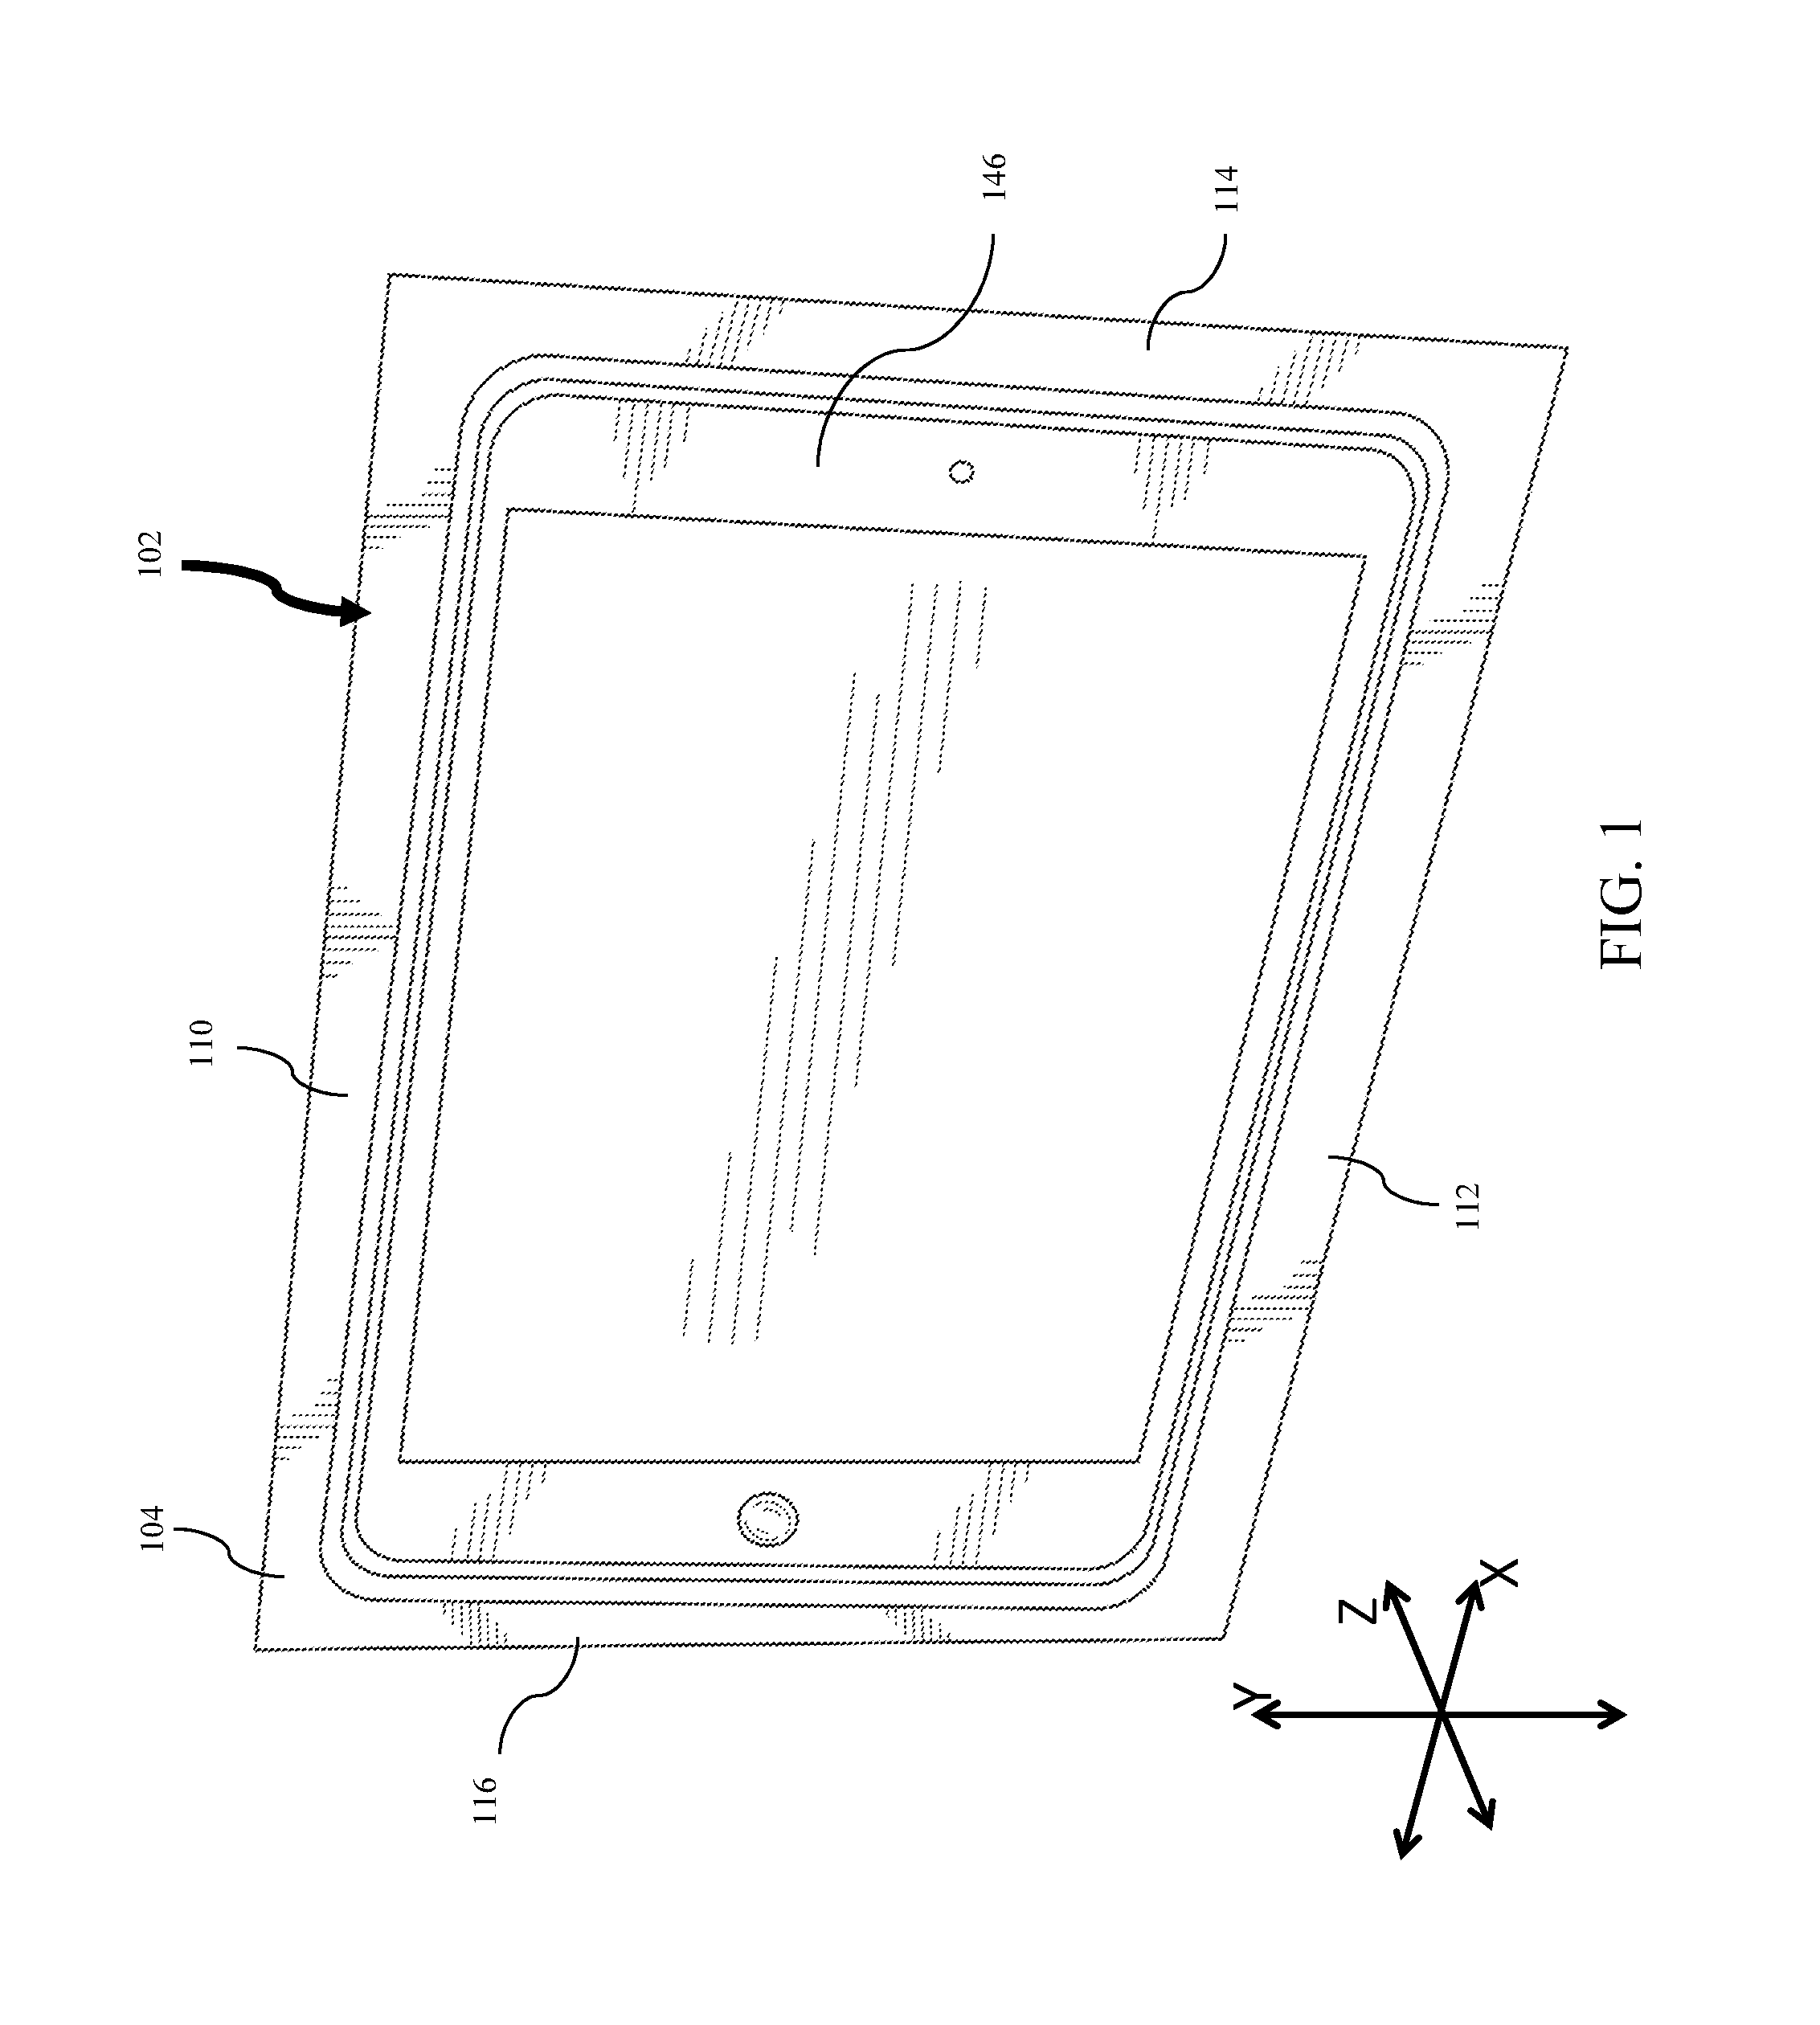 Mobile device mounting system and method